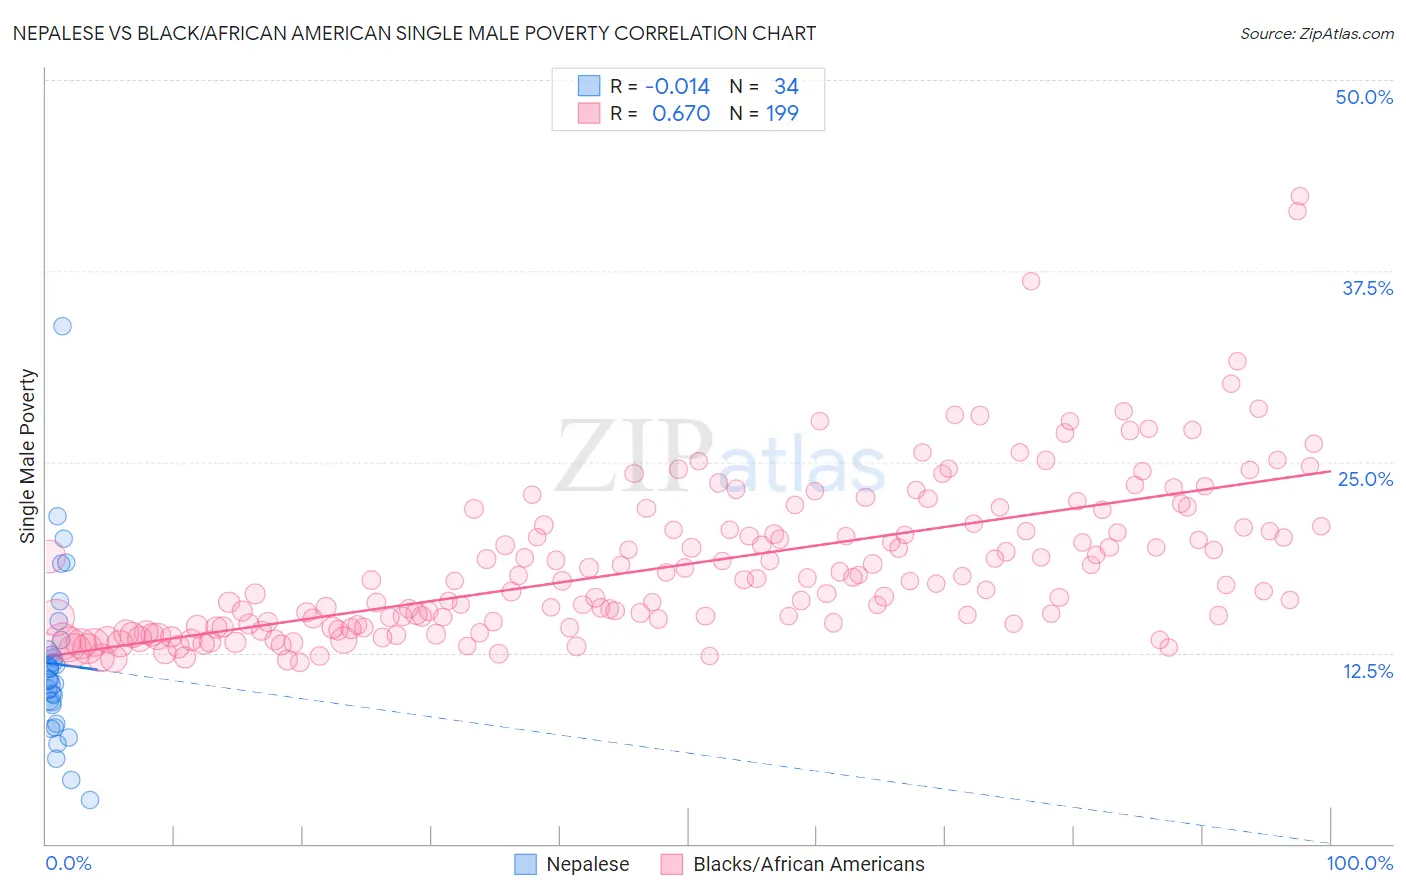 Nepalese vs Black/African American Single Male Poverty